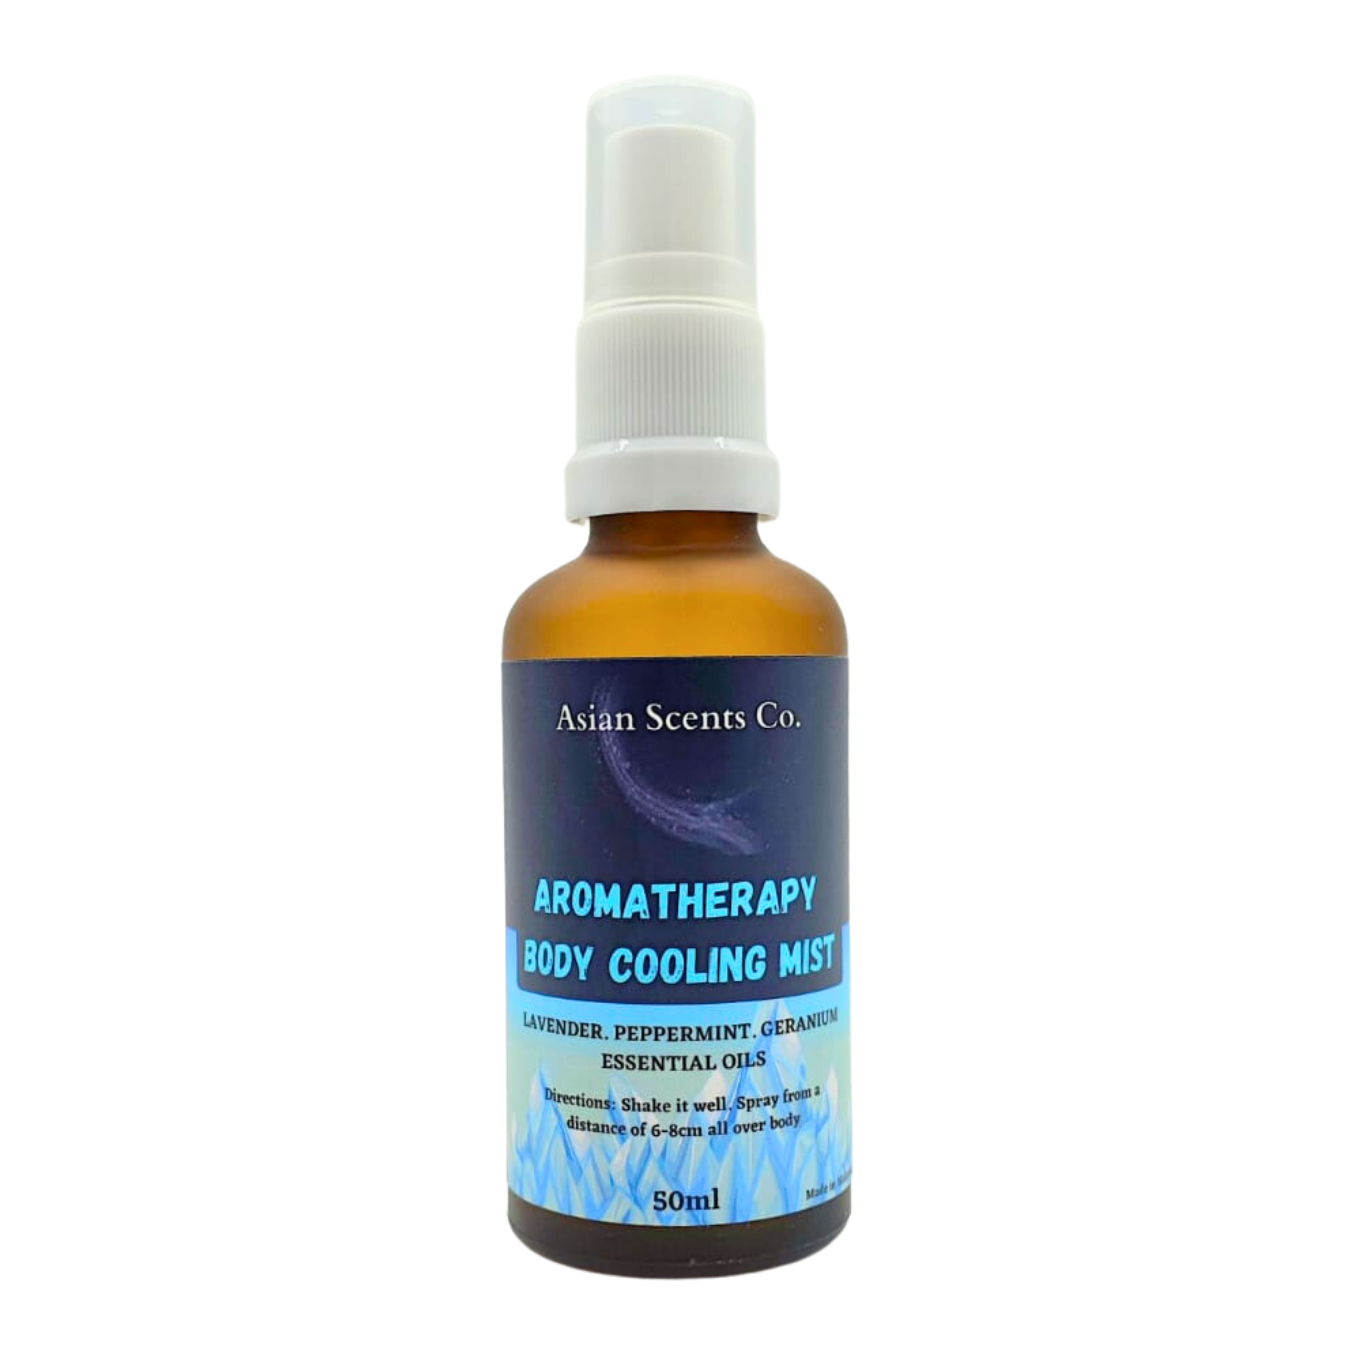 Aromatherapy Body Cooling Mist - 50ml *NEW*